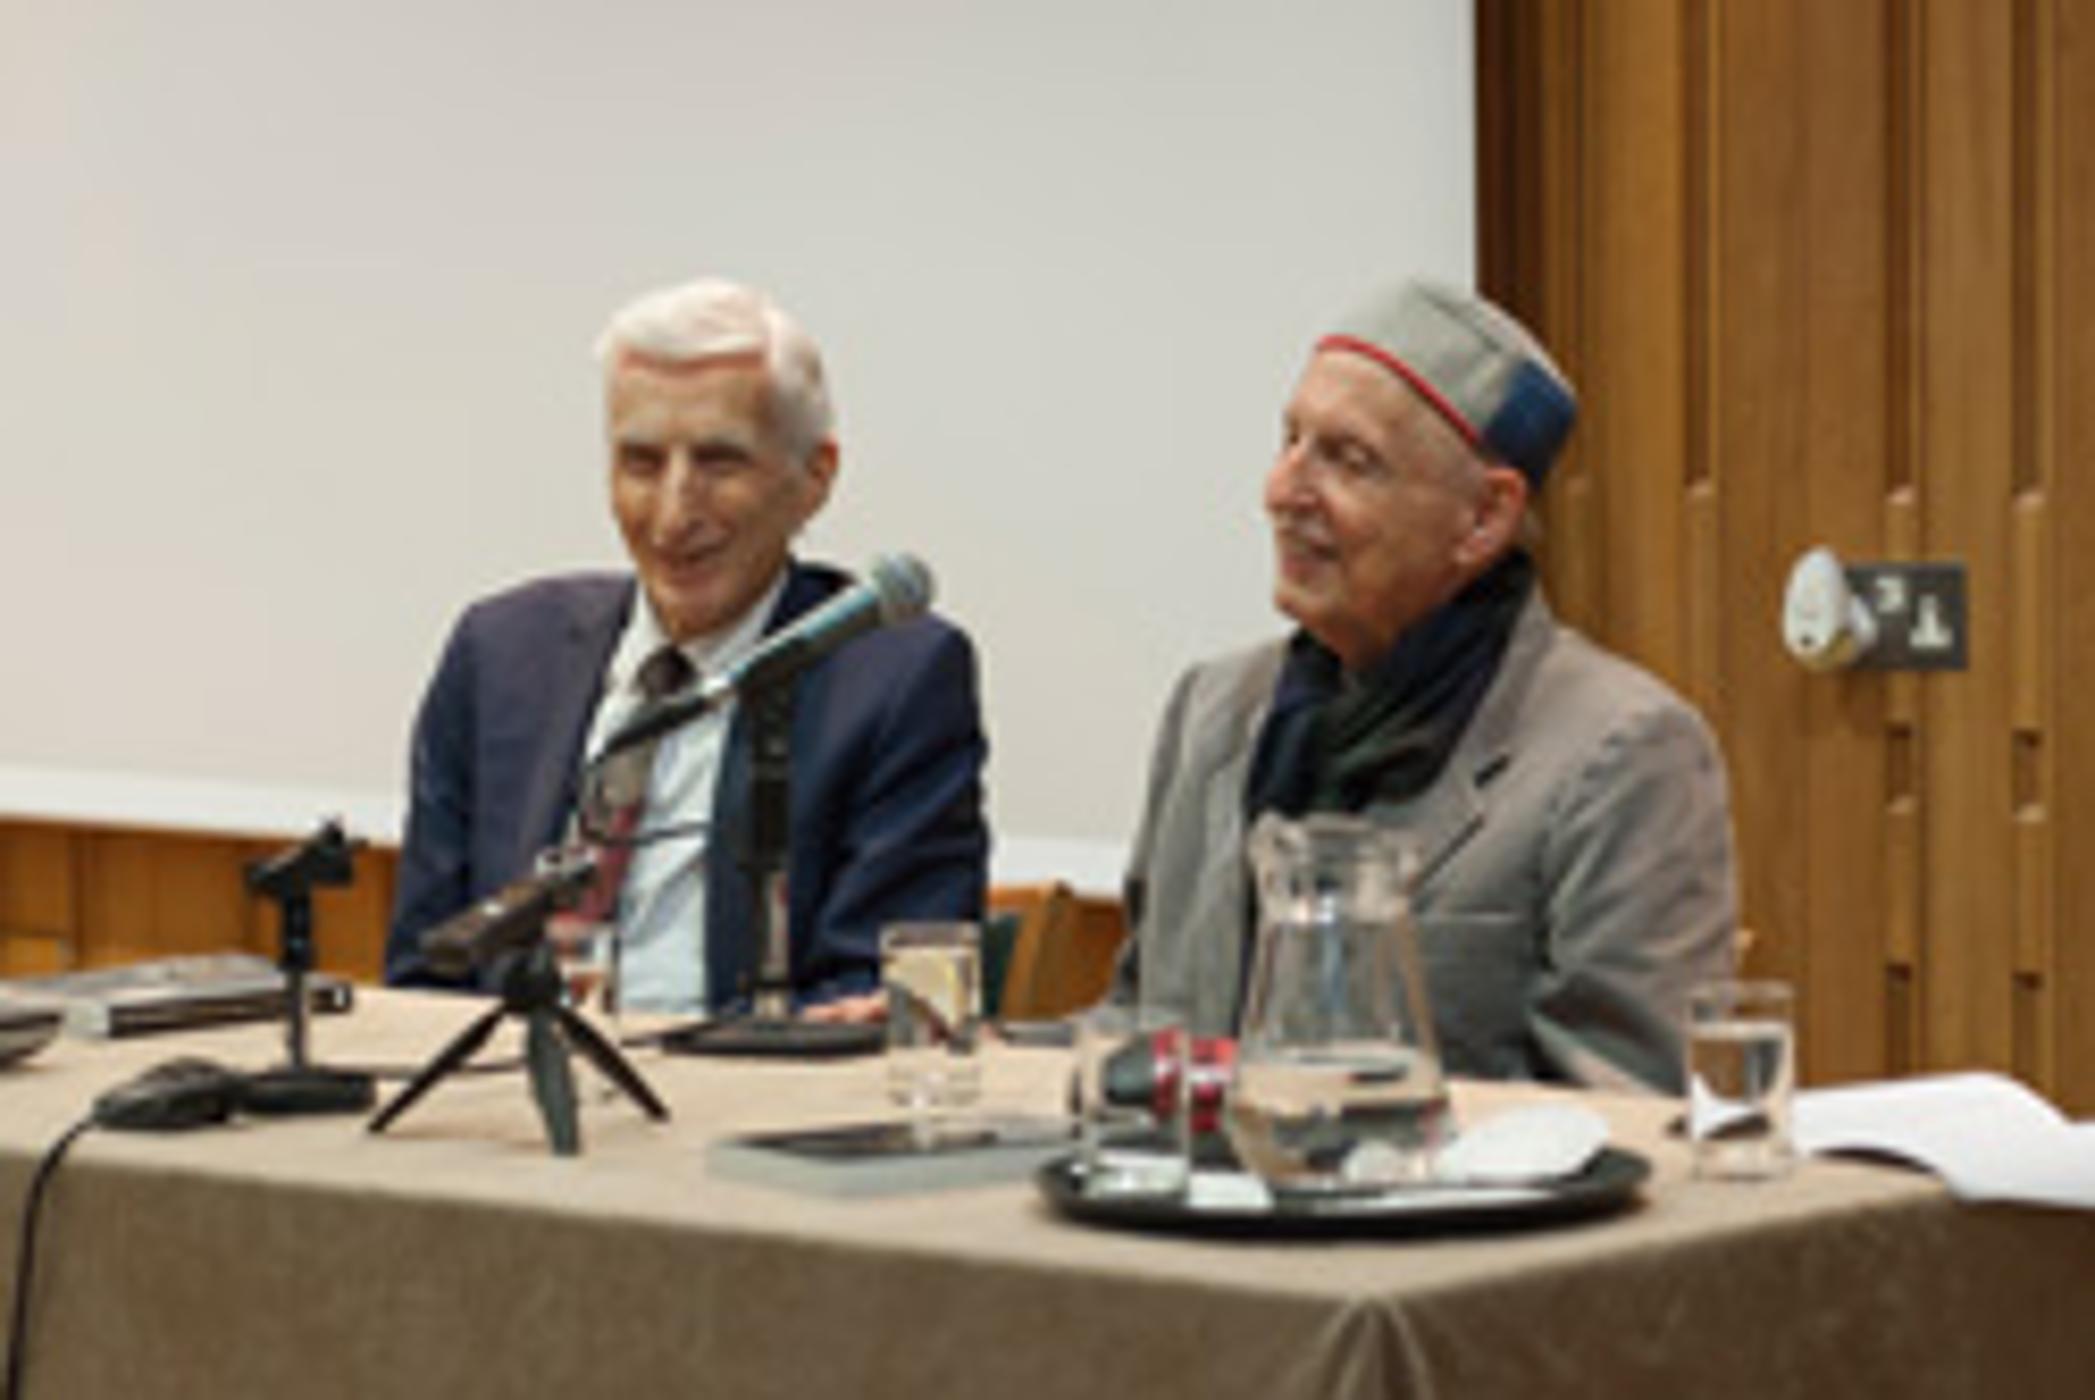 Professor Carl Djerassi ’in conversation’ with Lord Martin Rees, Astronomer Royal and Former Head of the Royal Society